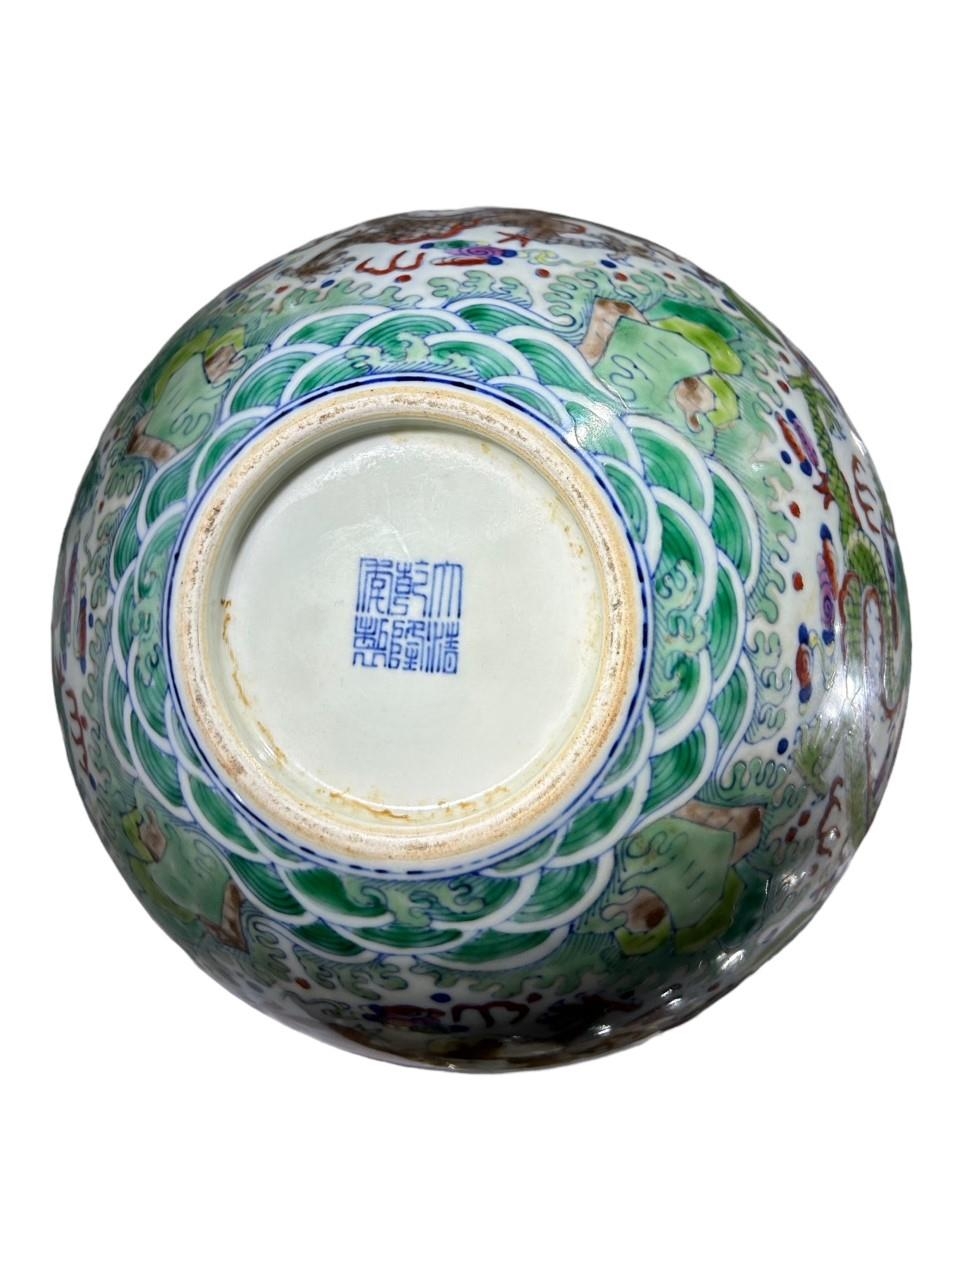 A CHINESE DOUCAI PATTERN BOTTLE VASE Decorated with four dragons chasing pearls of wisdom amongst - Image 6 of 6